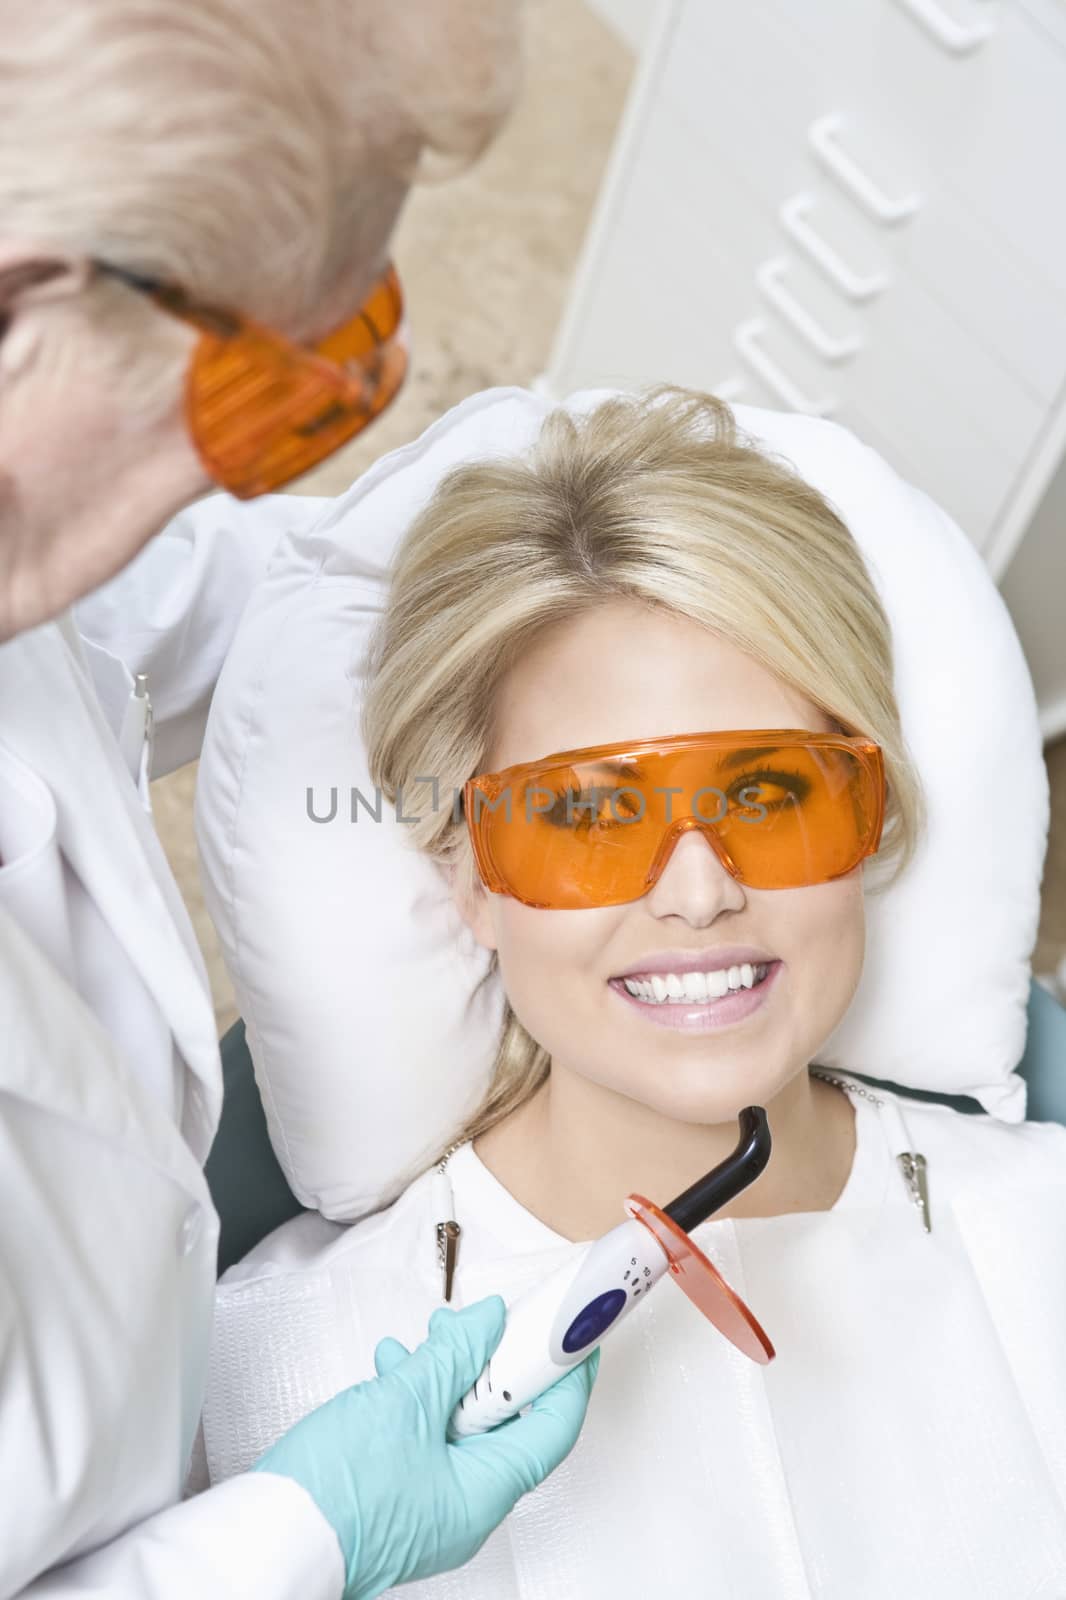 Dentist inspecting female patient's teeth using dental equipment in clinic by moodboard